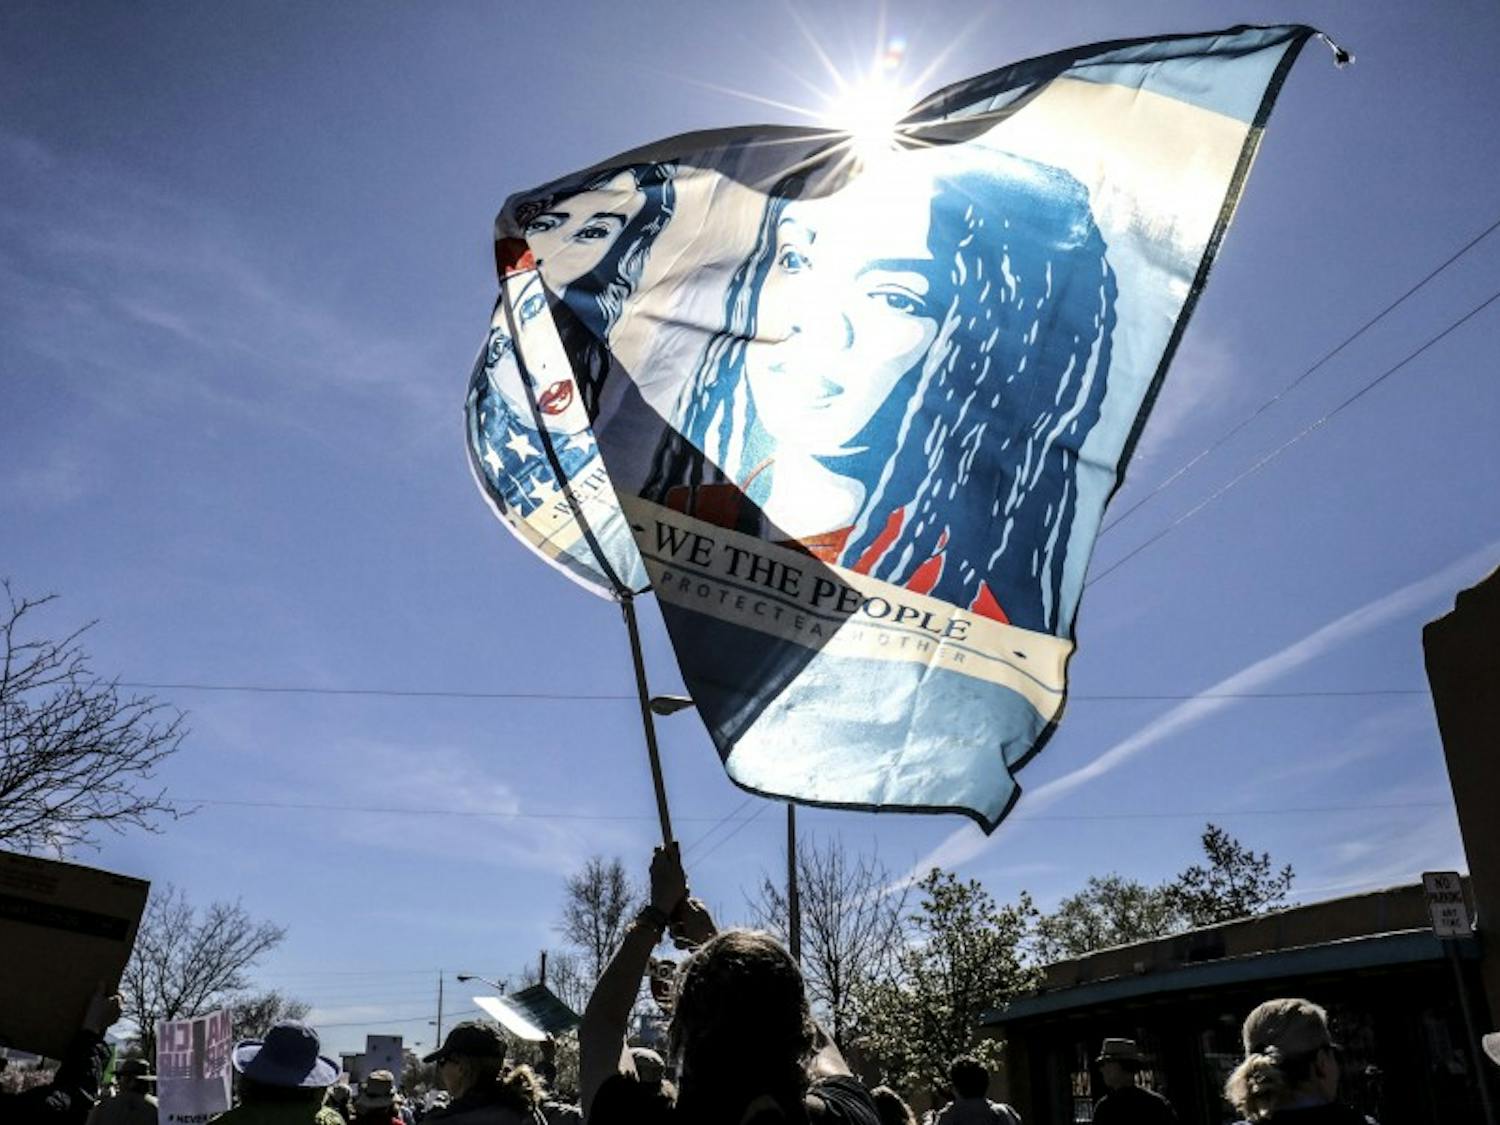 Babs Jaramillo waives a “We the People” flag during Saturday’s nationwide “March for Our Lives” event on March 24, 2018. Albuquerque participants began marching in Old Town before heading to Tiguex Park where Mayor Tim Keller and others spoke.&nbsp;